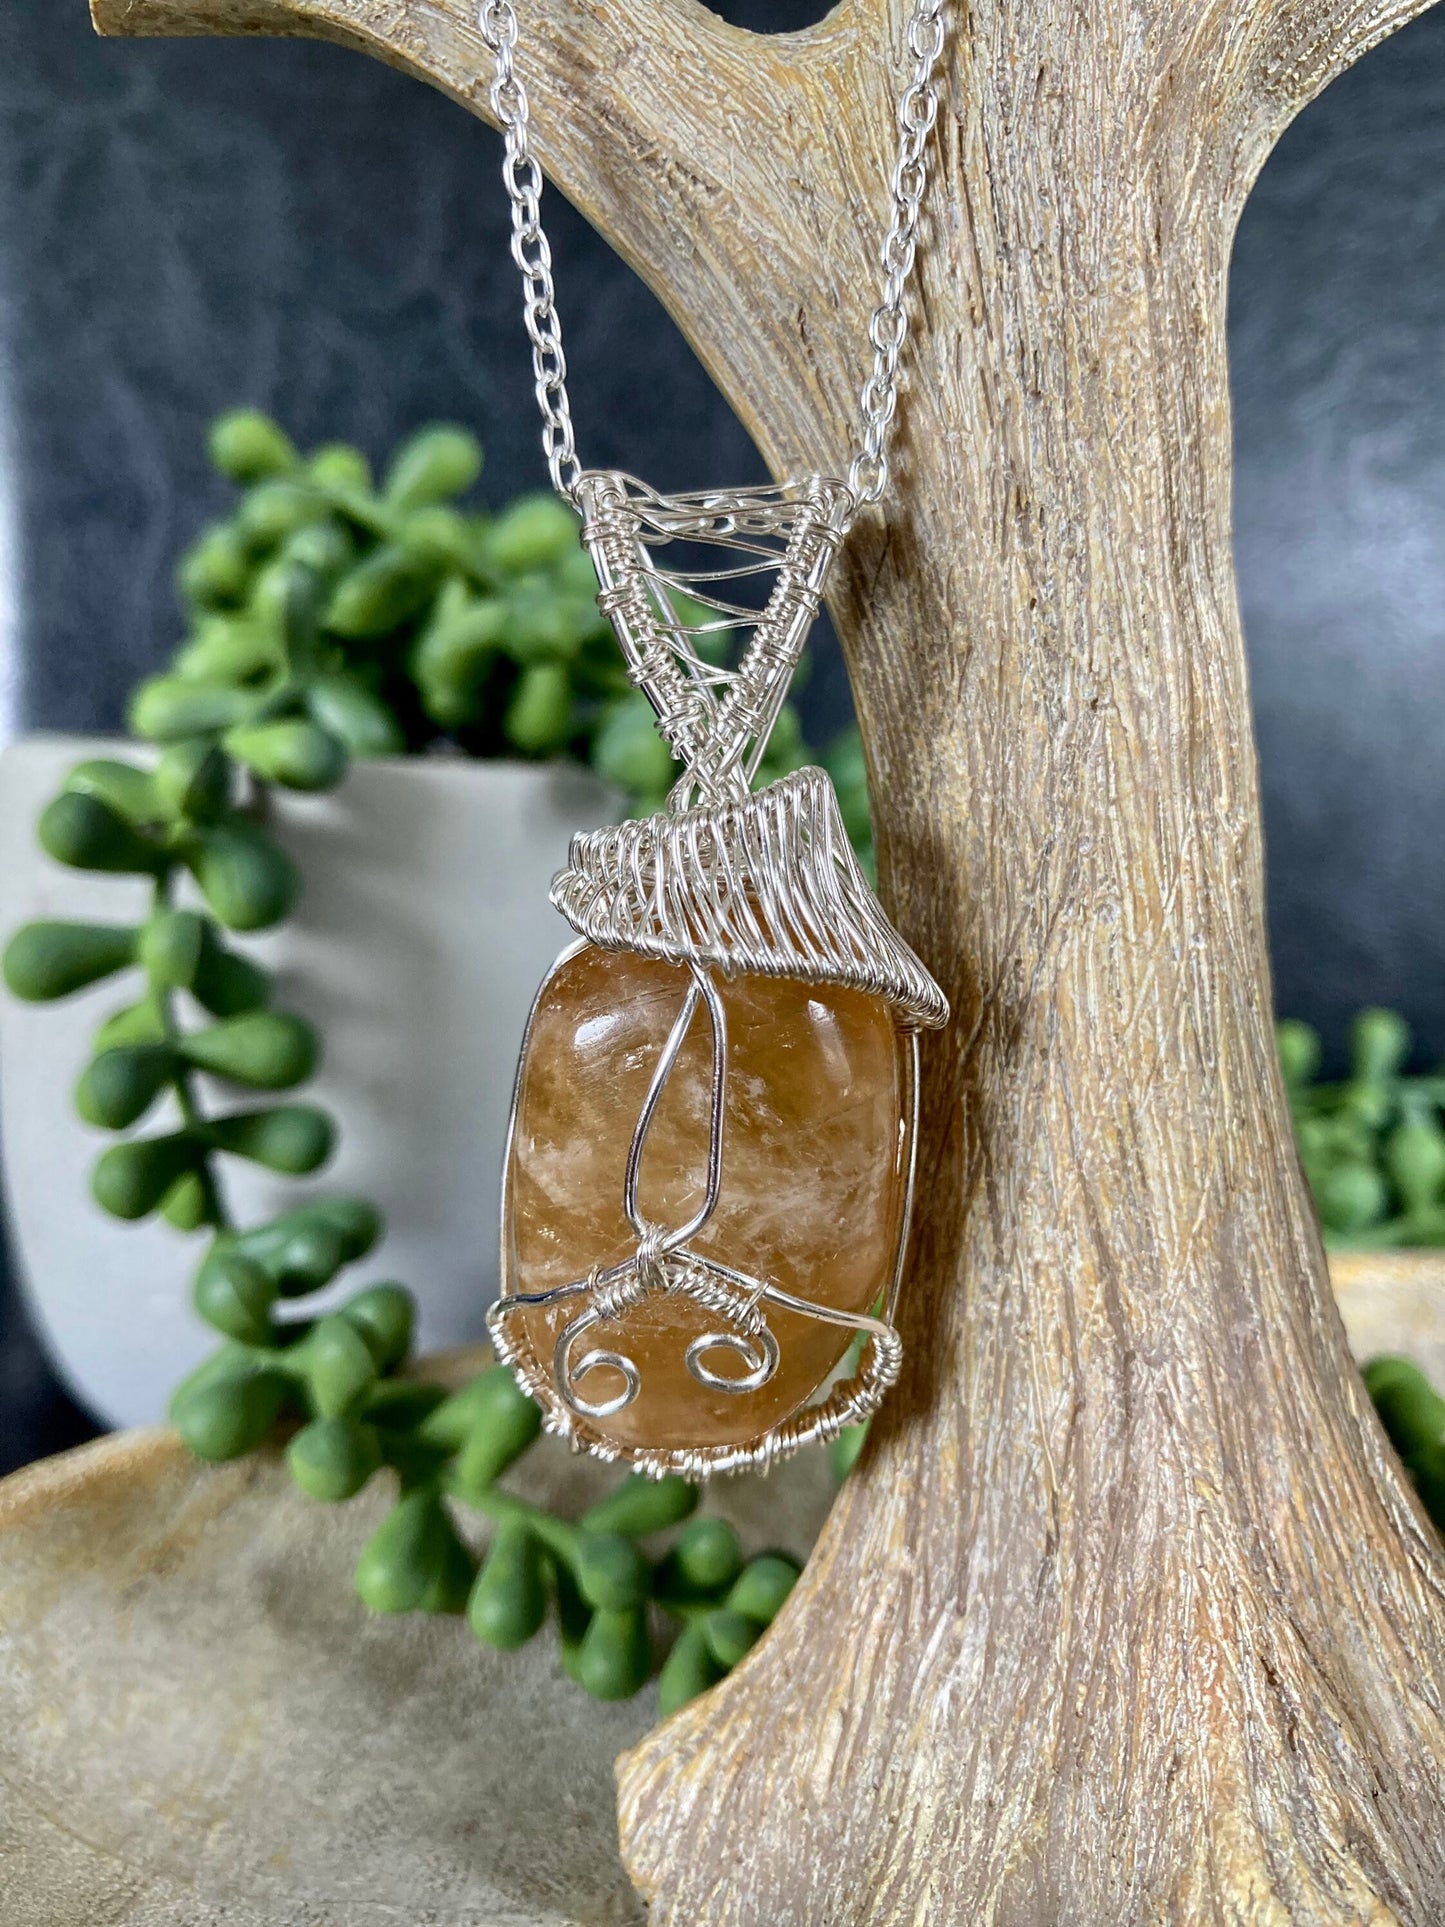 Honey calcite pendant handmade necklace wire wrapped natural stone with 18 inch length chain